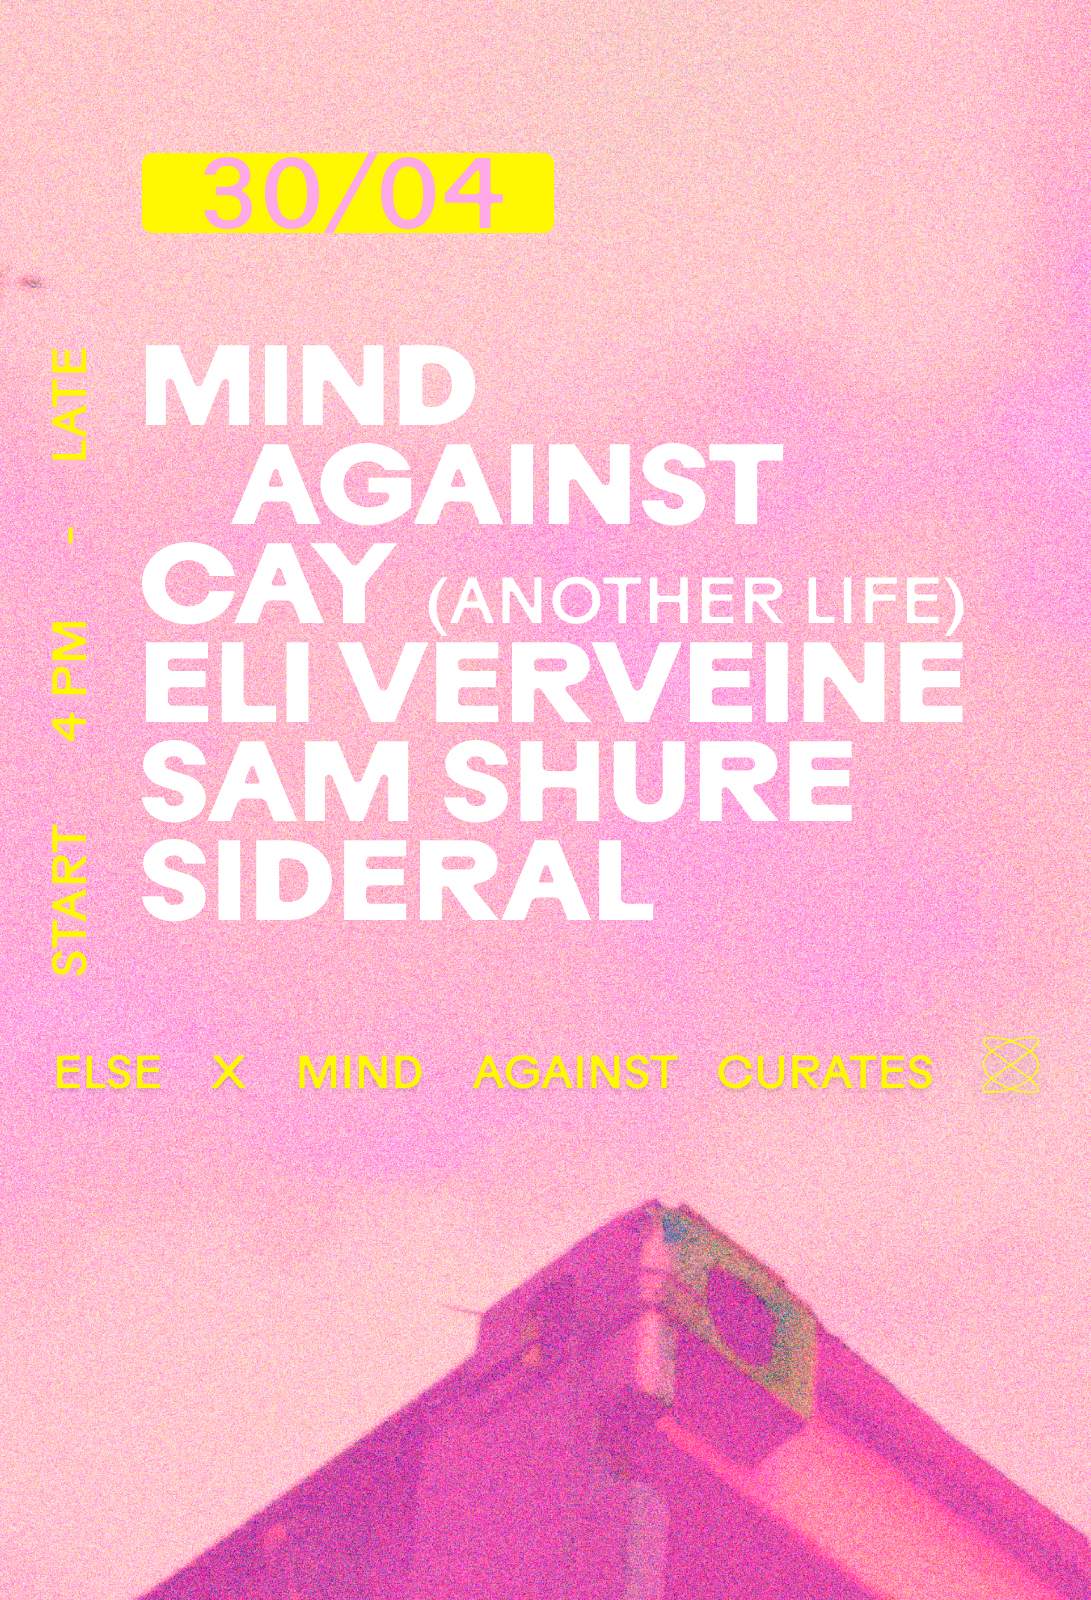 Else X Mind Against Curates: Sam Shure, Eli Verveine, SIDERAL, CAY - フライヤー表